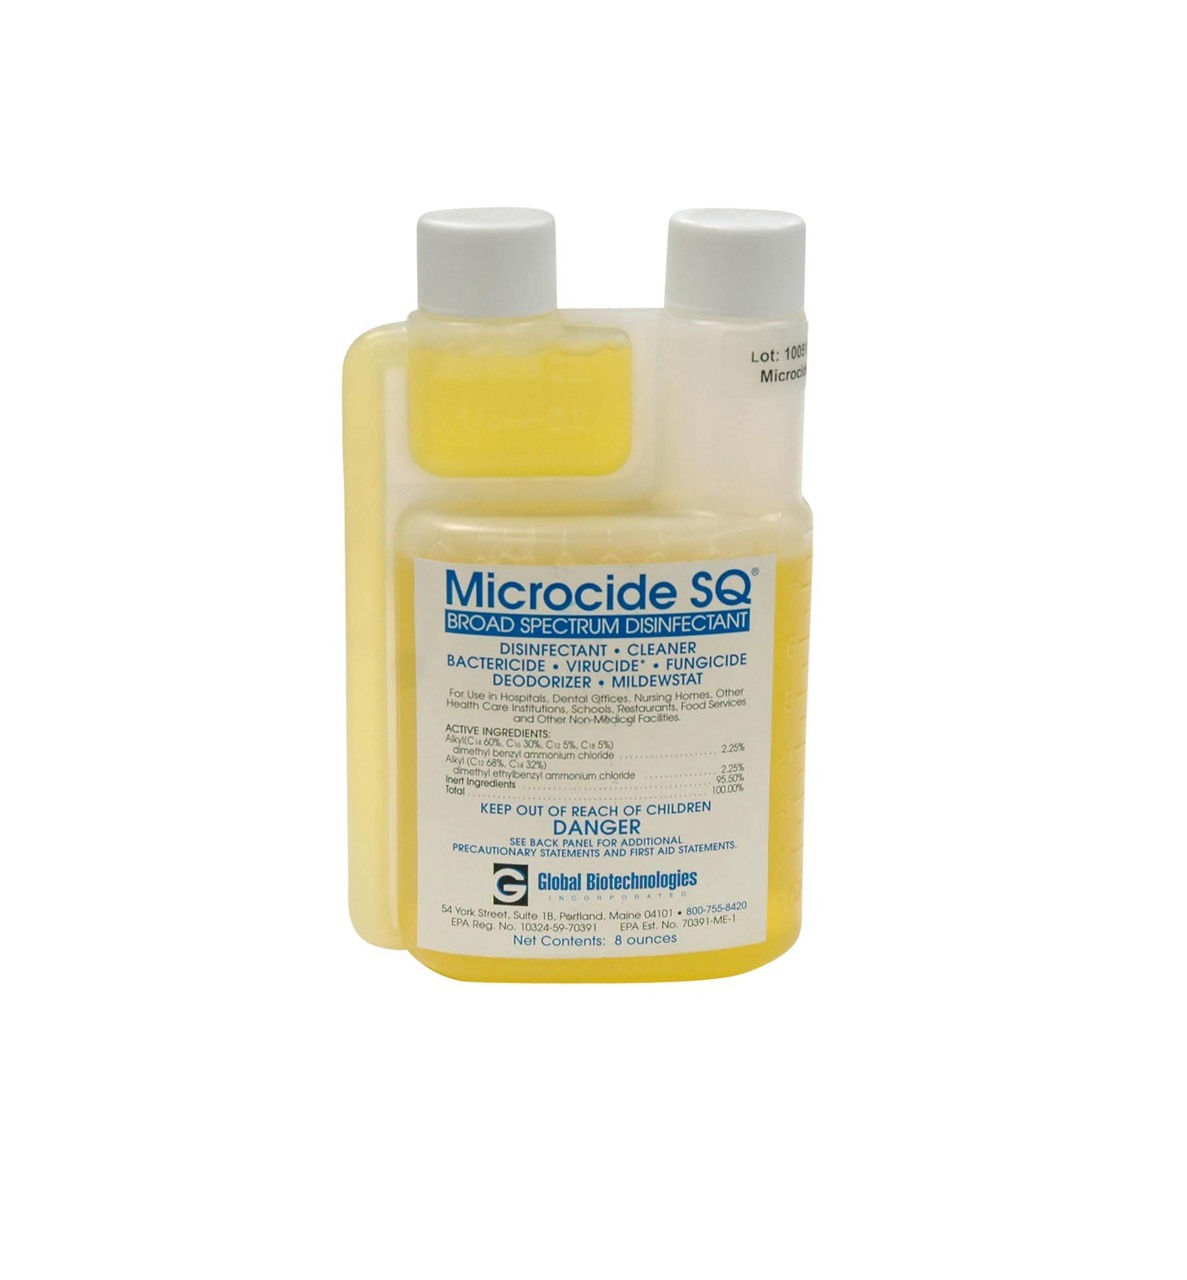 Microcide SQ Broad Spectrum Disinfectant